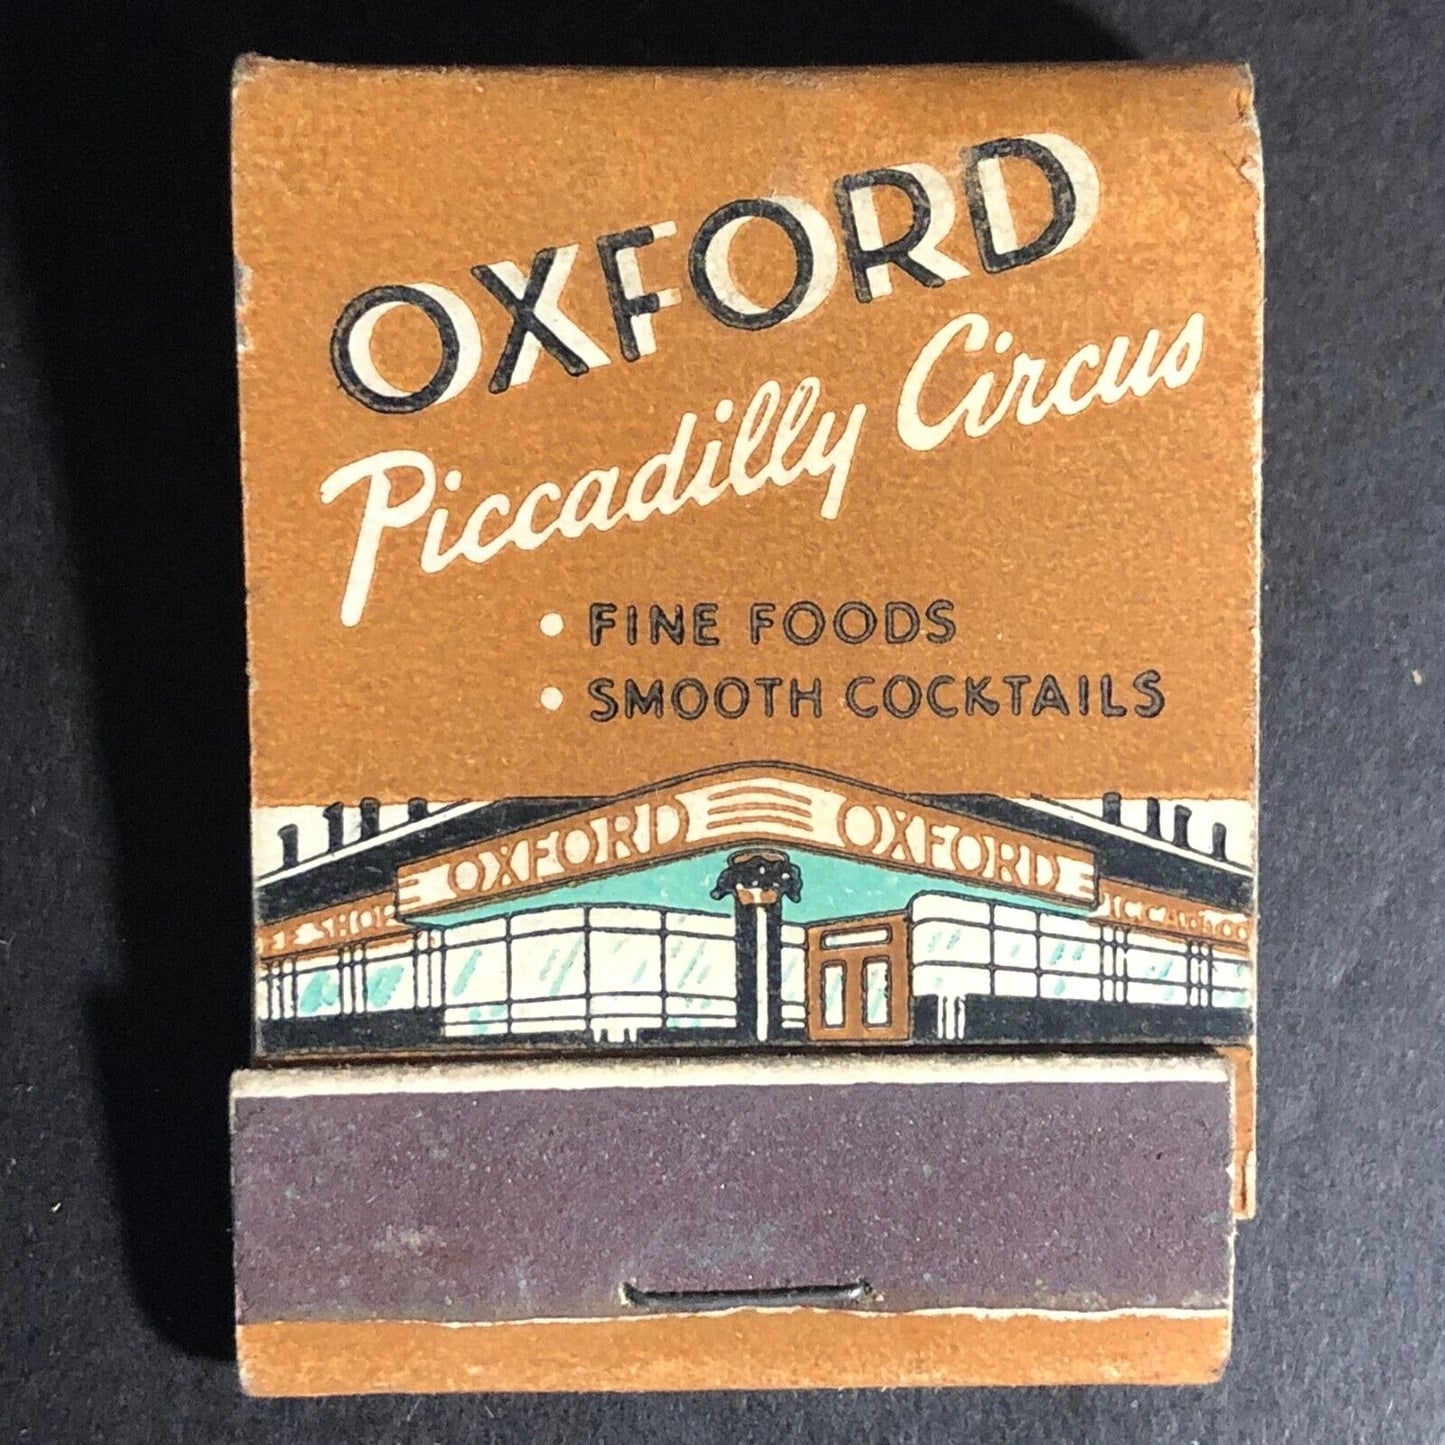 Hotel Oxford Piccadilly Circus 20-Strike Full Matchbook c1940's-50's Very Scarce